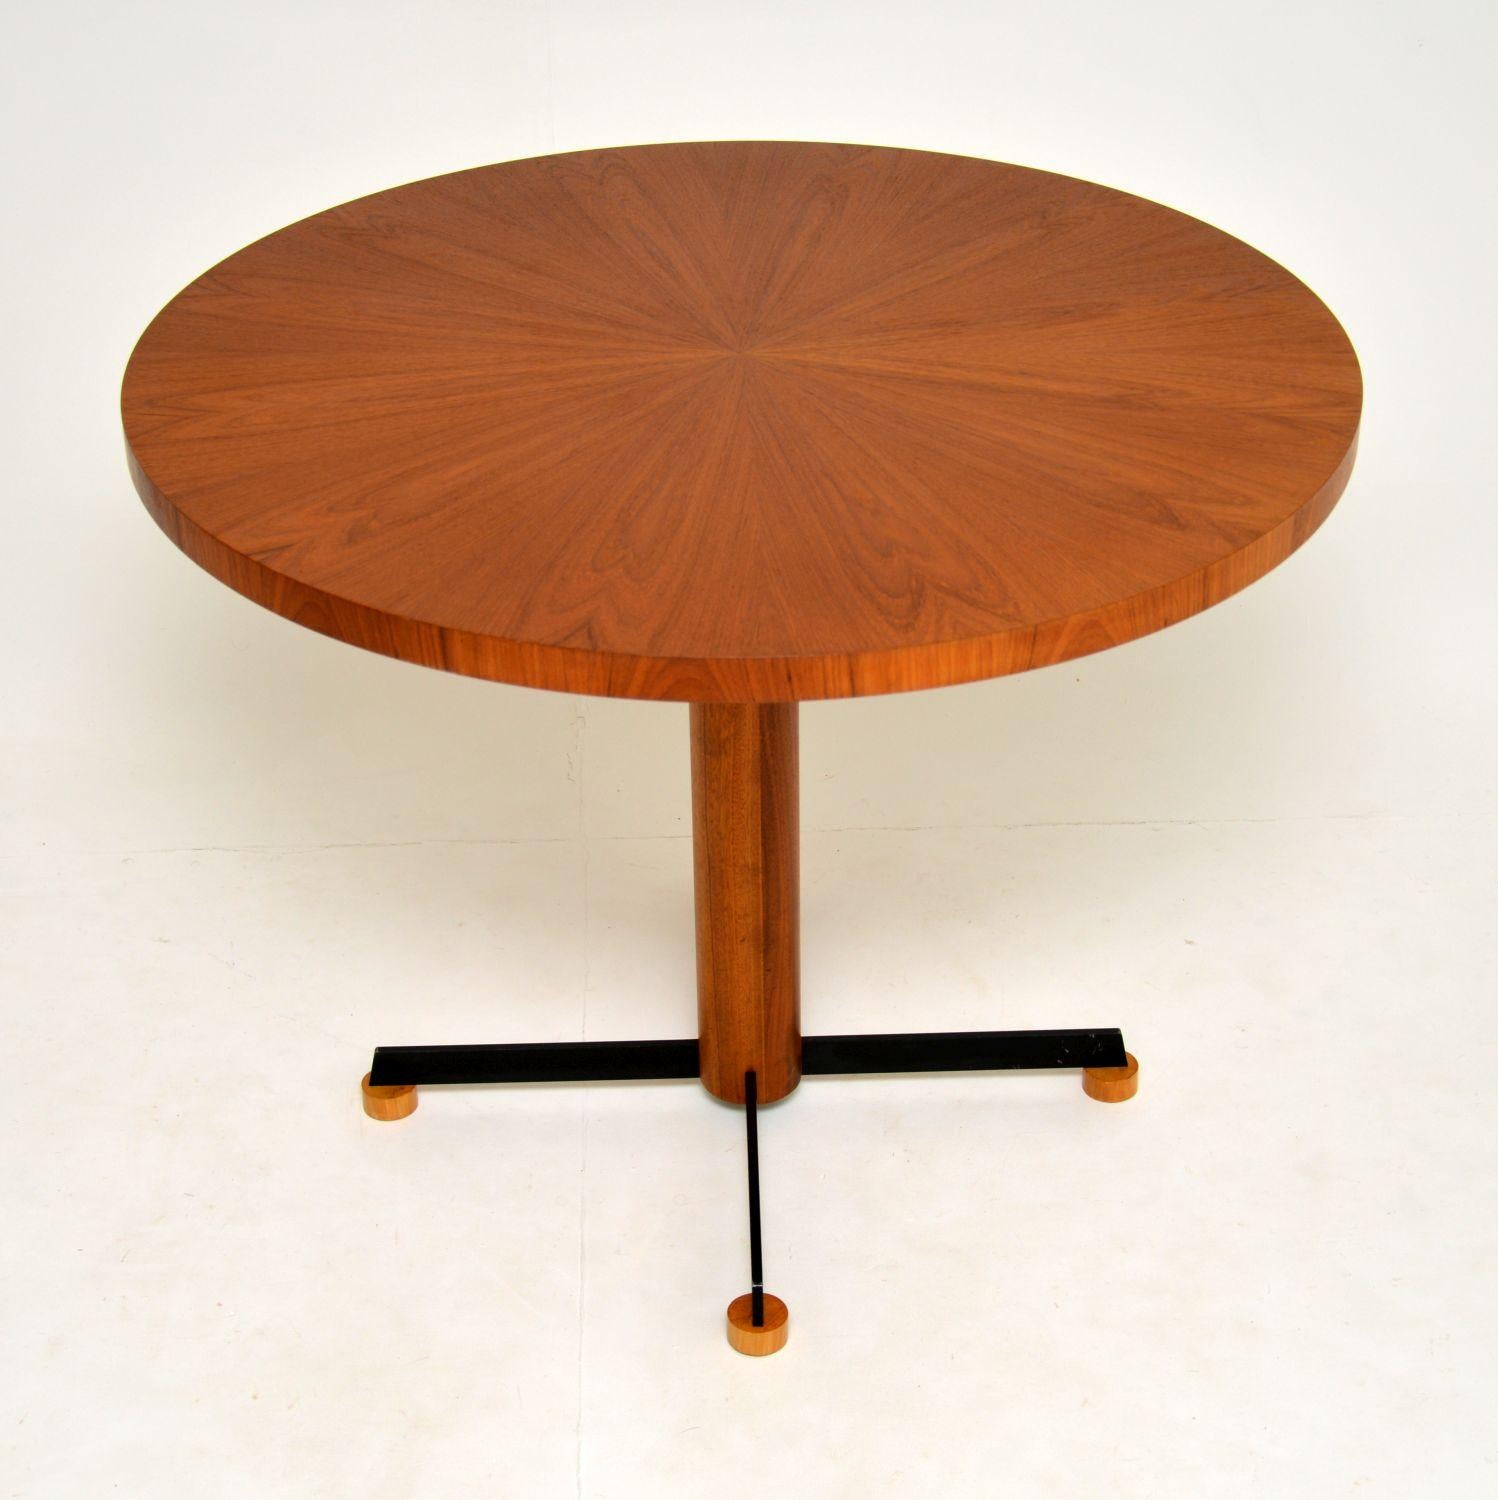 A stylish and top quality vintage teak circular dining table. This was made in Denmark, it dates from circa 1960s-1970s.

The teak top is veneered in a gorgeous sunburst pattern, this sits on a teak column base, with black metal splayed legs